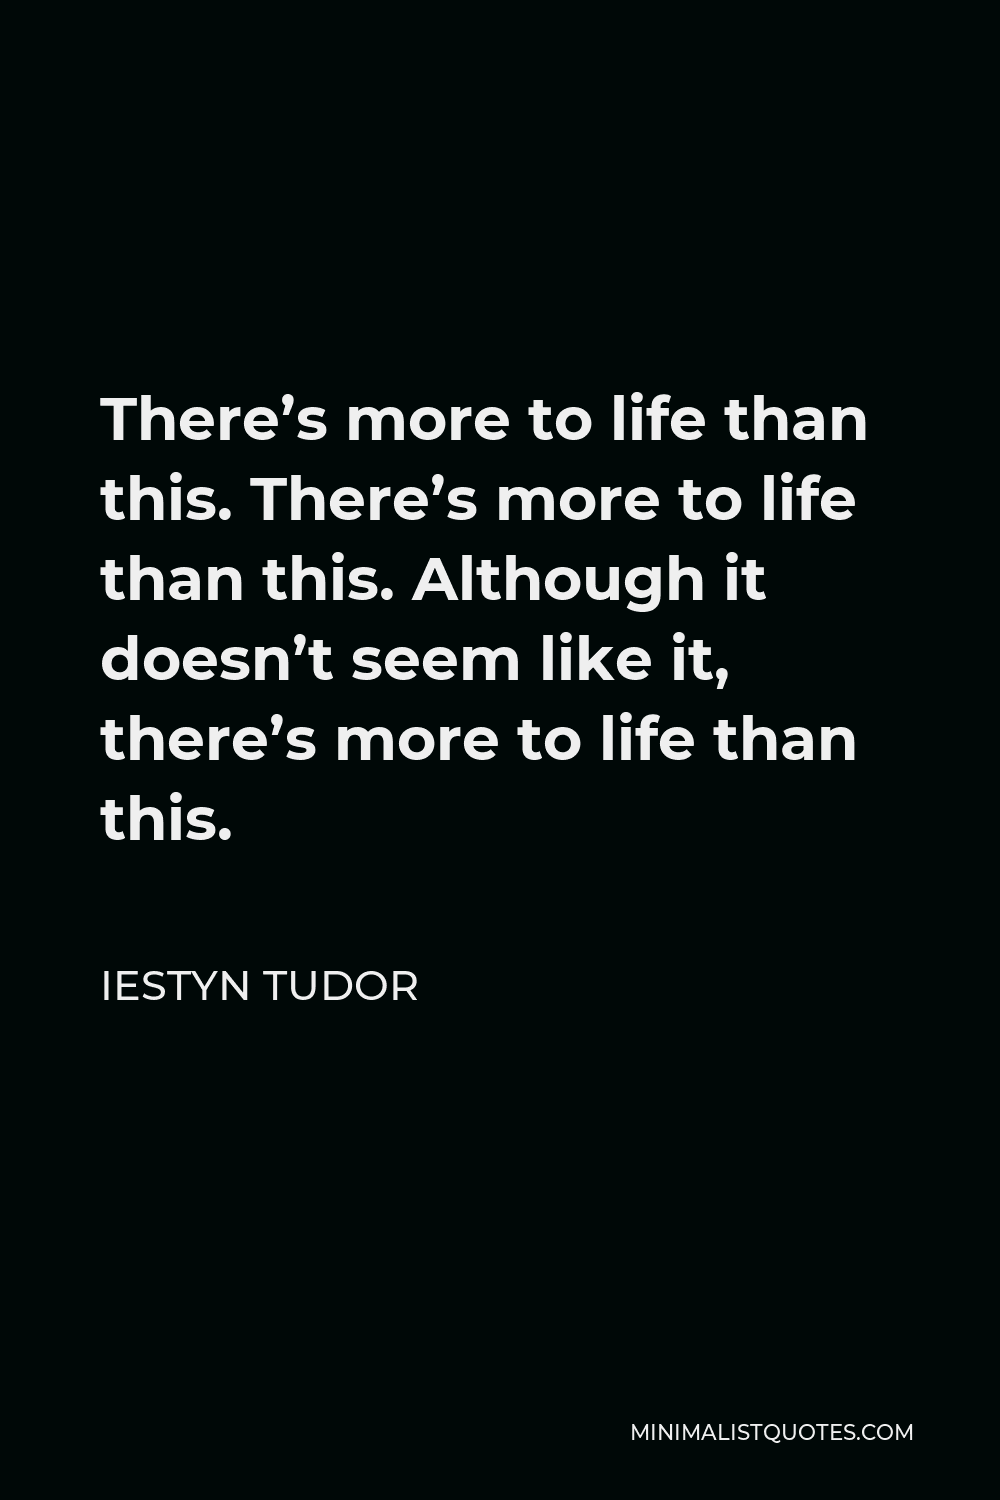 Iestyn Tudor Quote - There’s more to life than this. There’s more to life than this. Although it doesn’t seem like it, there’s more to life than this.